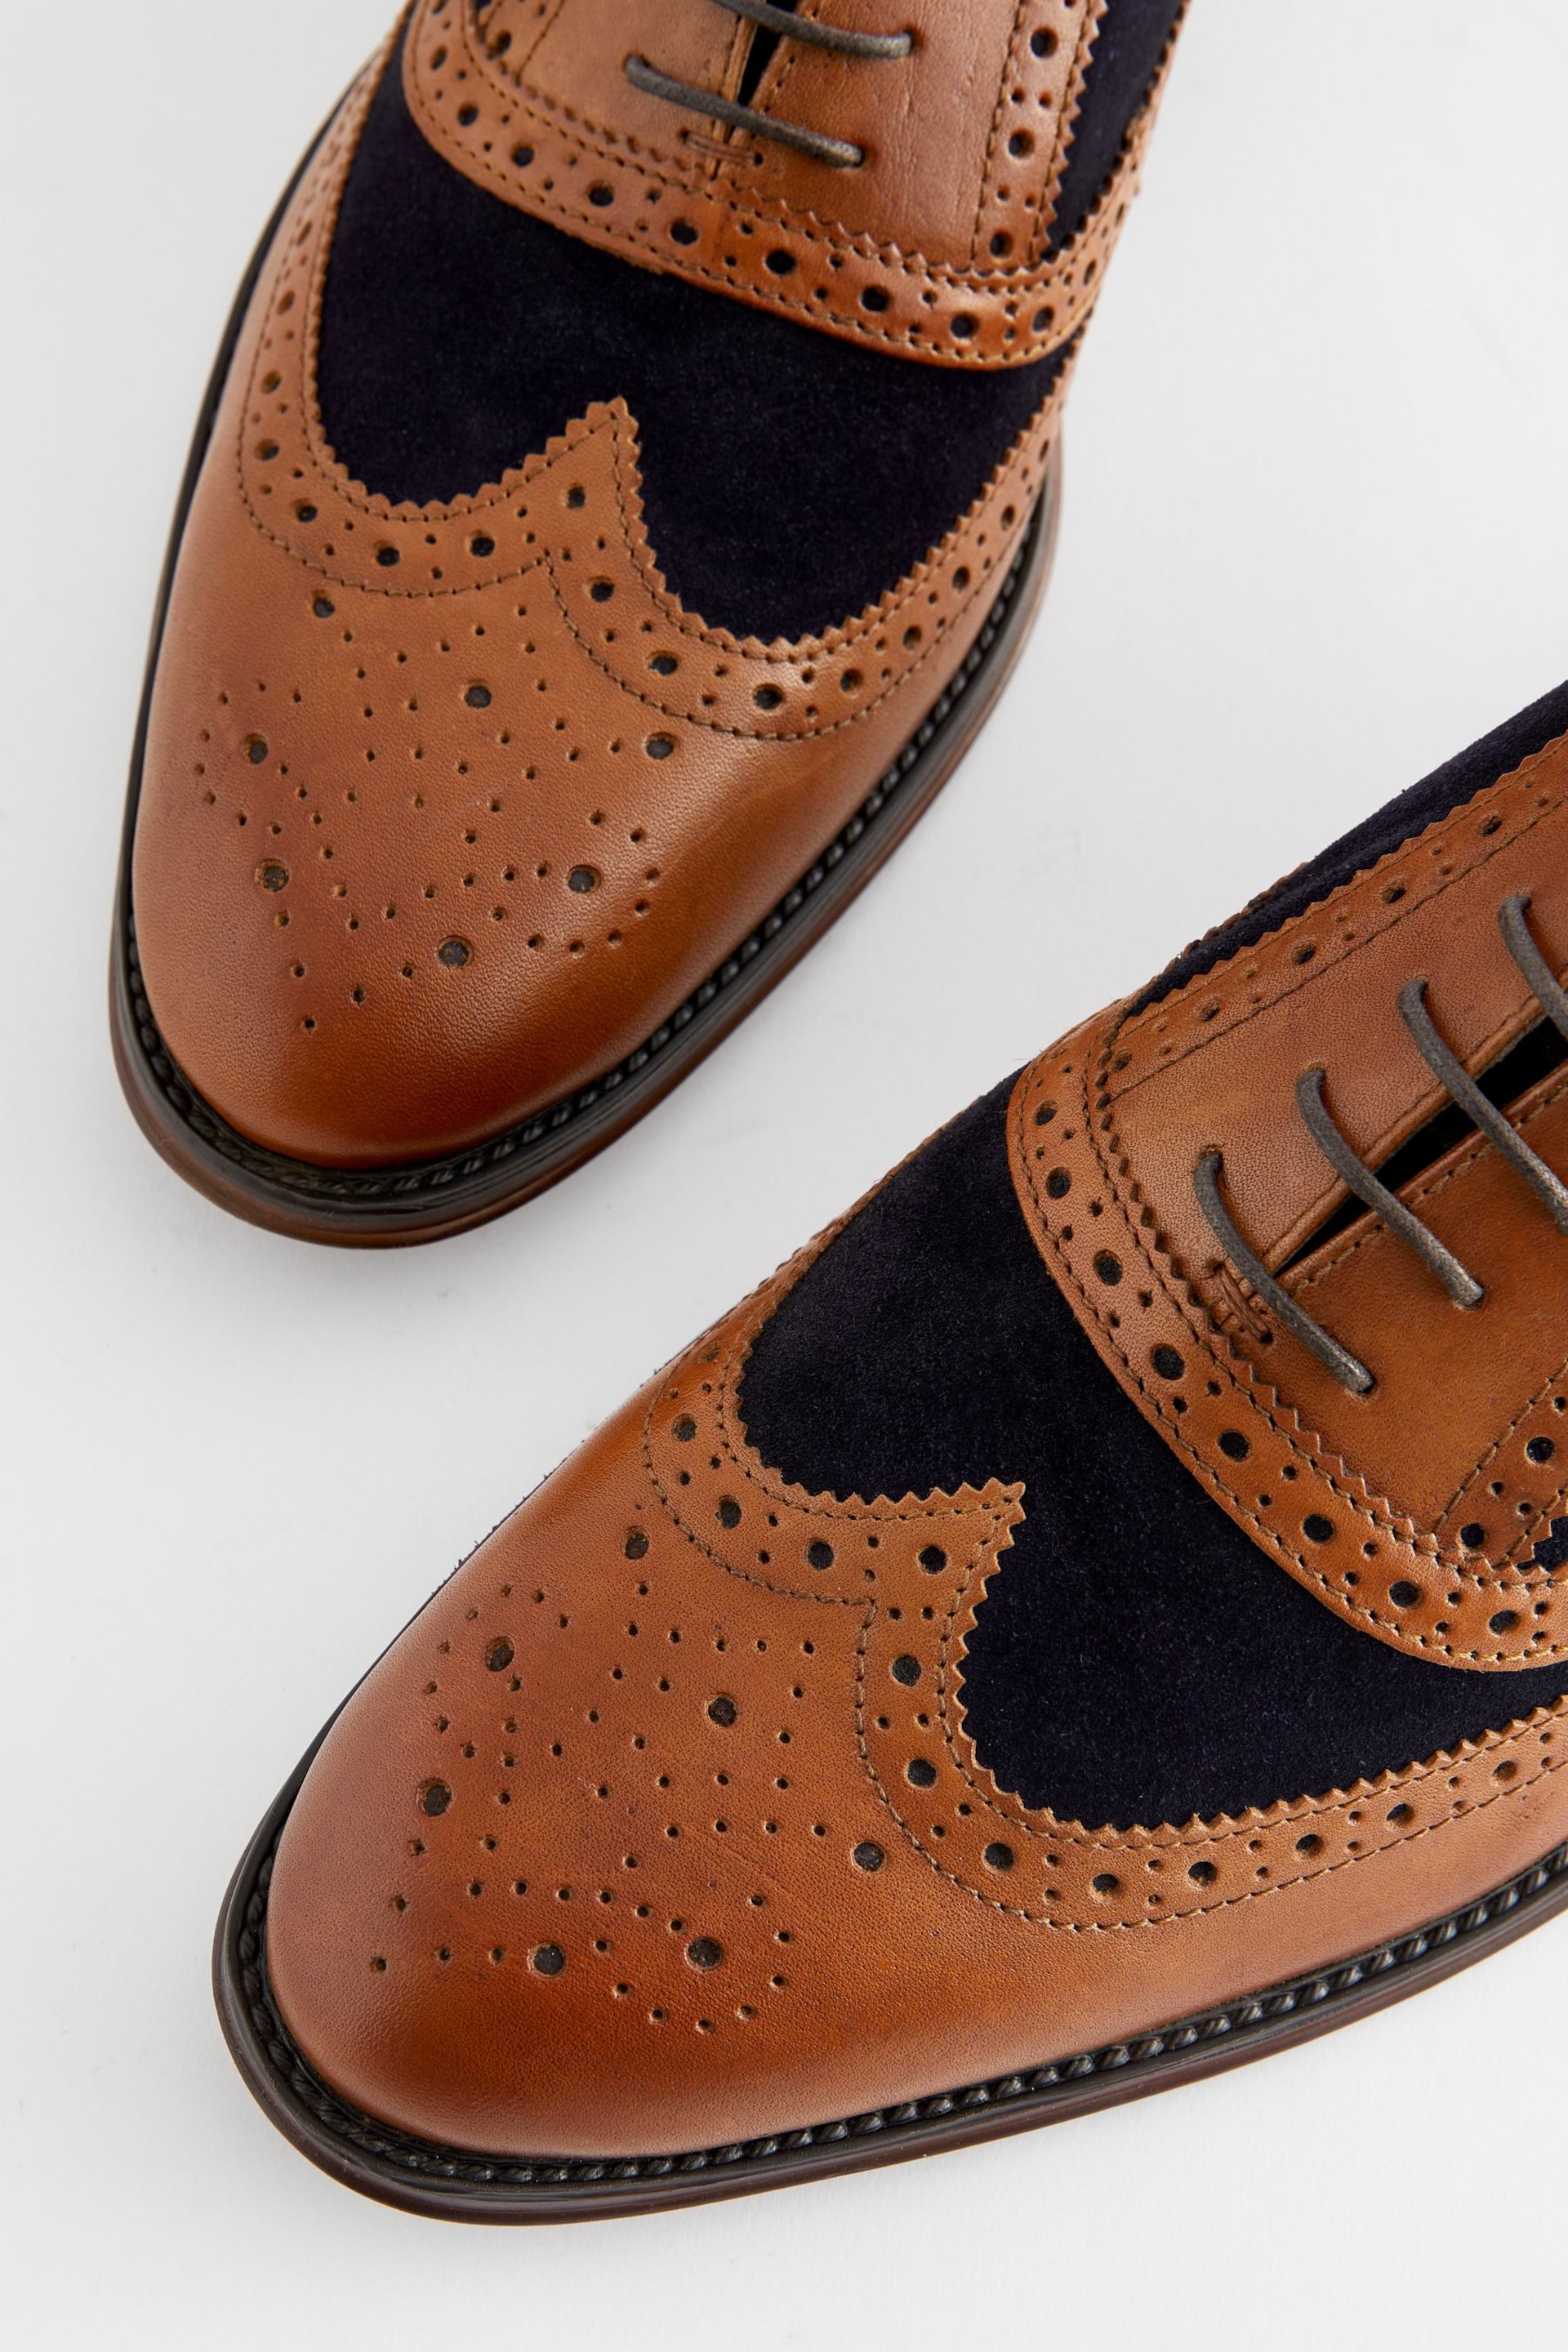 Tan/Navy Leather Contrast Panel Brogue Shoes - Image 3 of 6